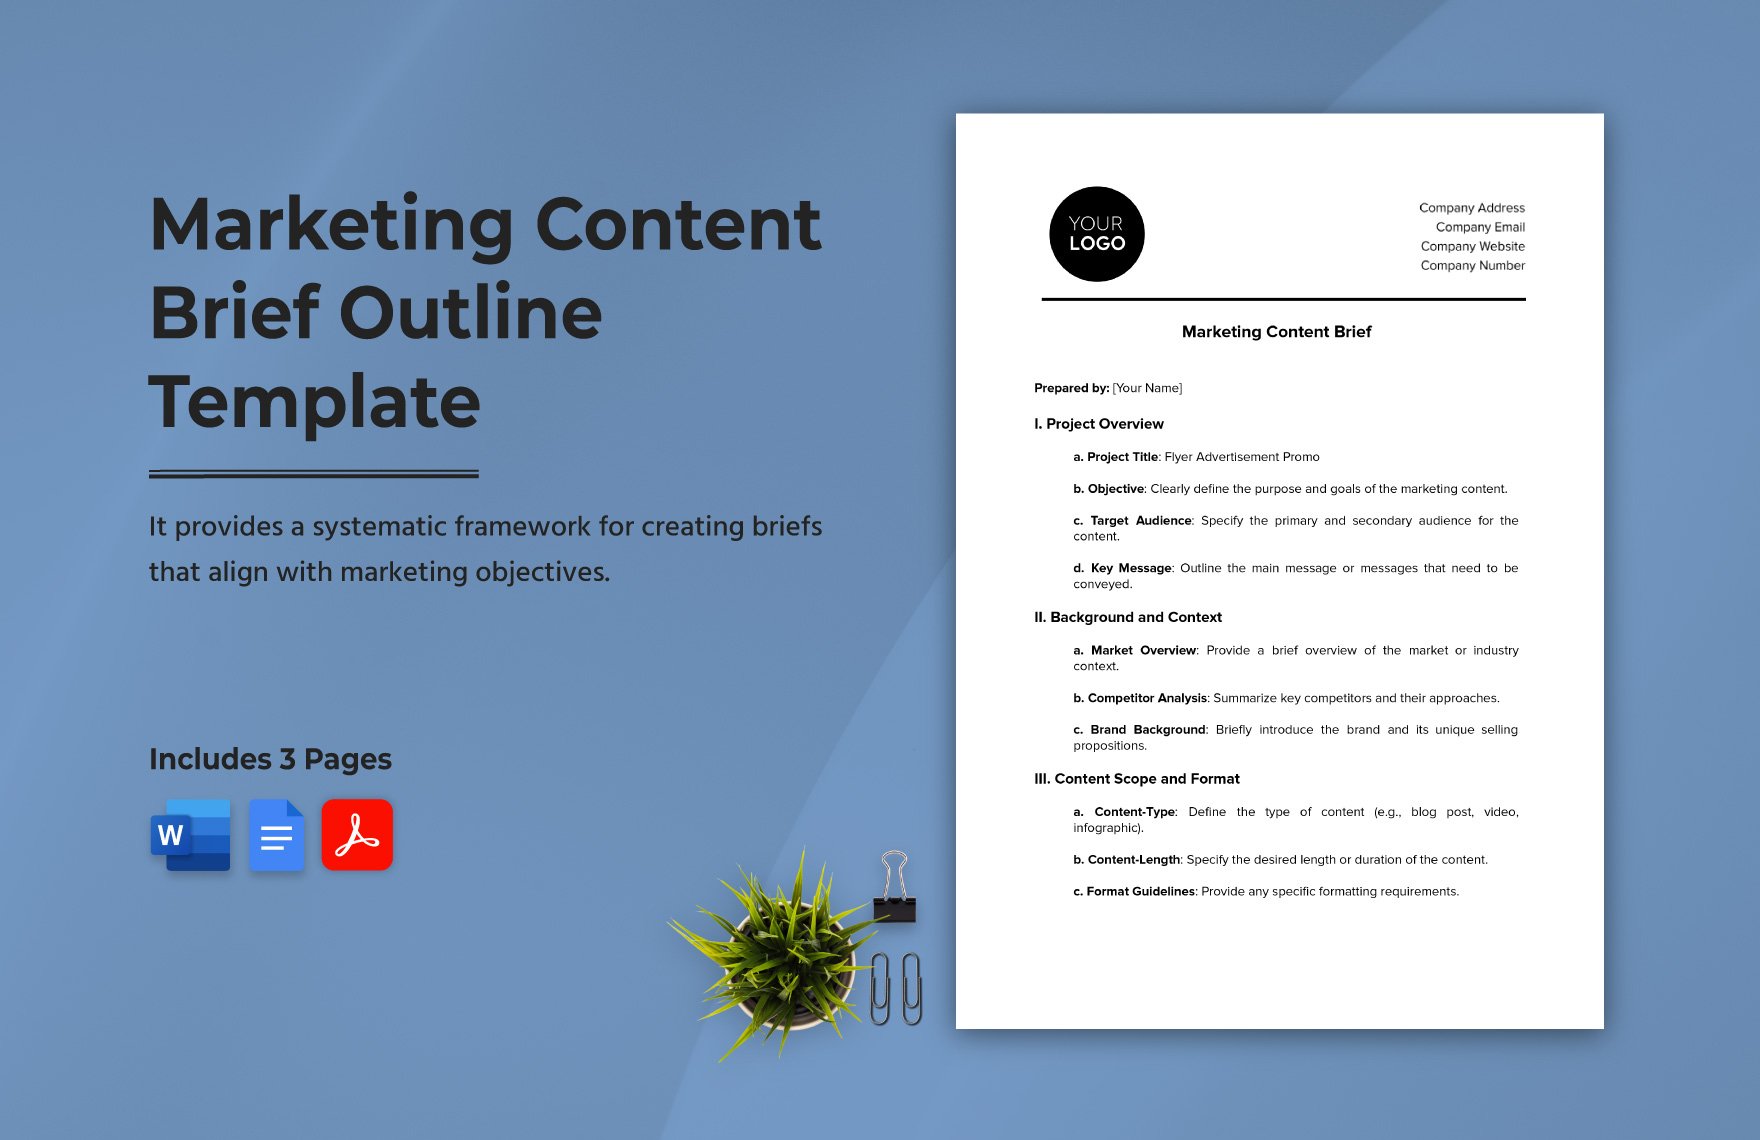 Marketing Content Brief Outline Template in Word, Google Docs, PDF